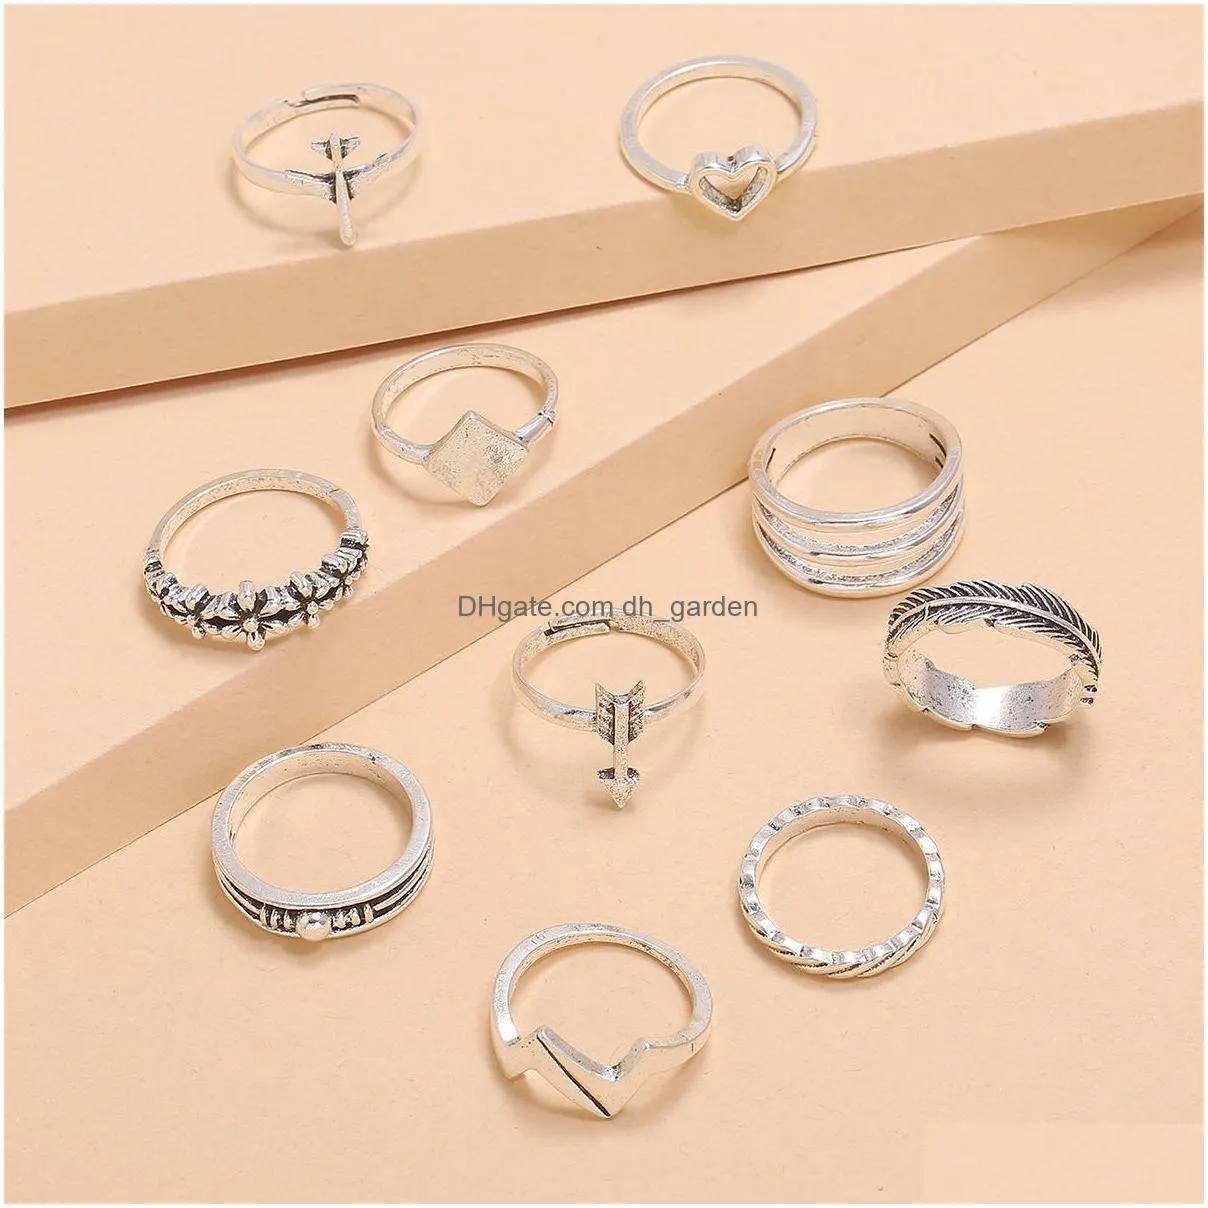 10 sets/lot vintage rings sets for women jewelry accessories heart flowers stars finger ring female jewelry gifts